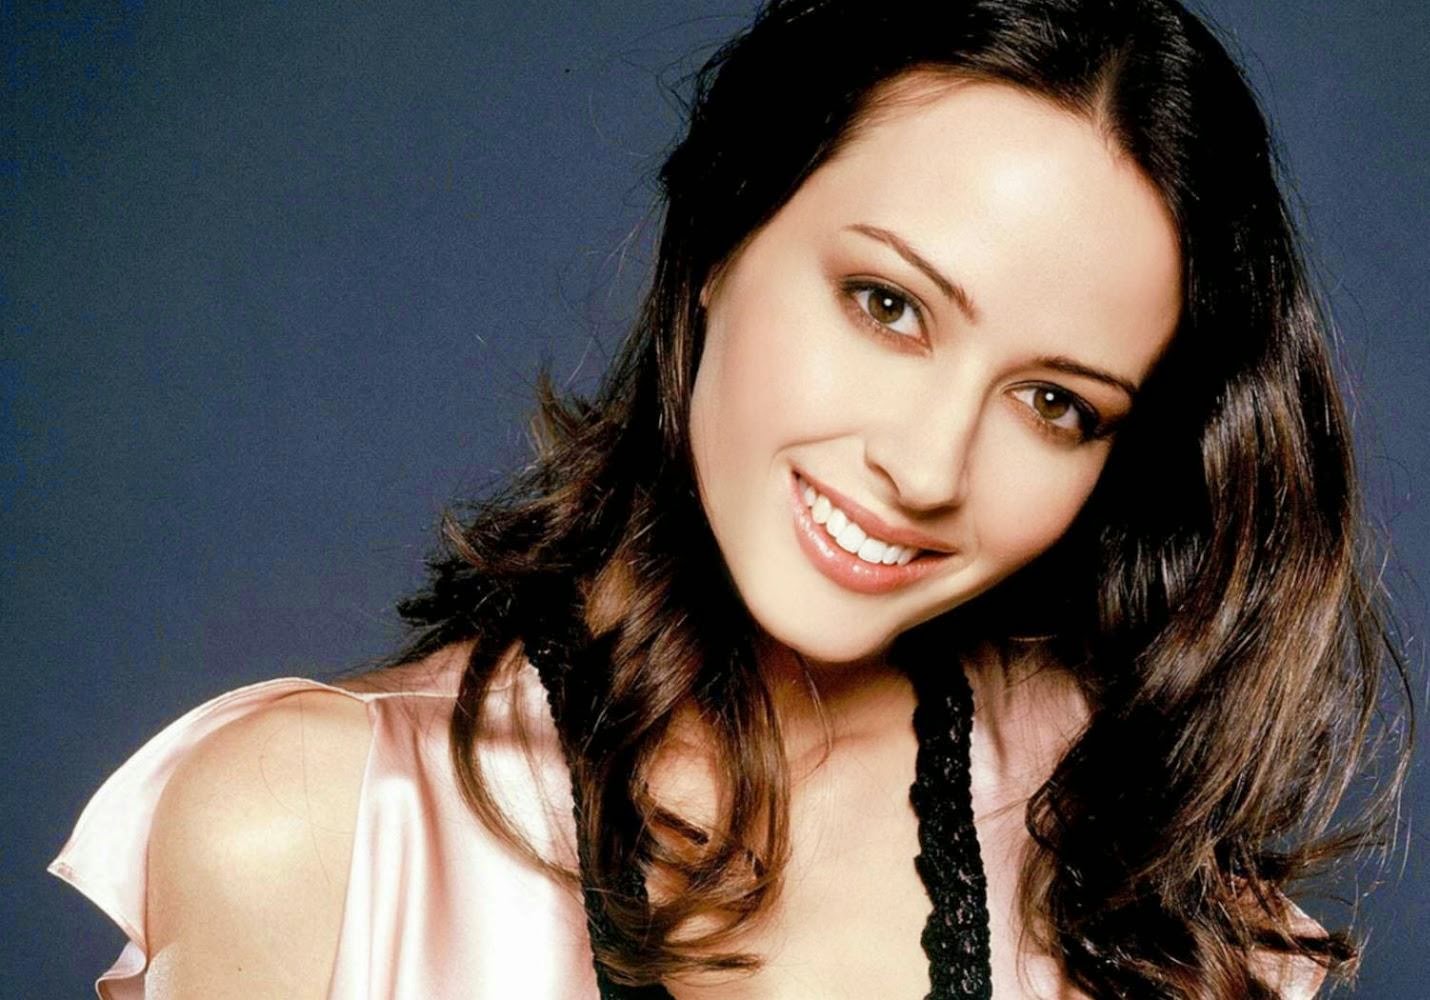 Star HD Wallpapers Free Download: Amy Acker Hd Wallpapers Free Download